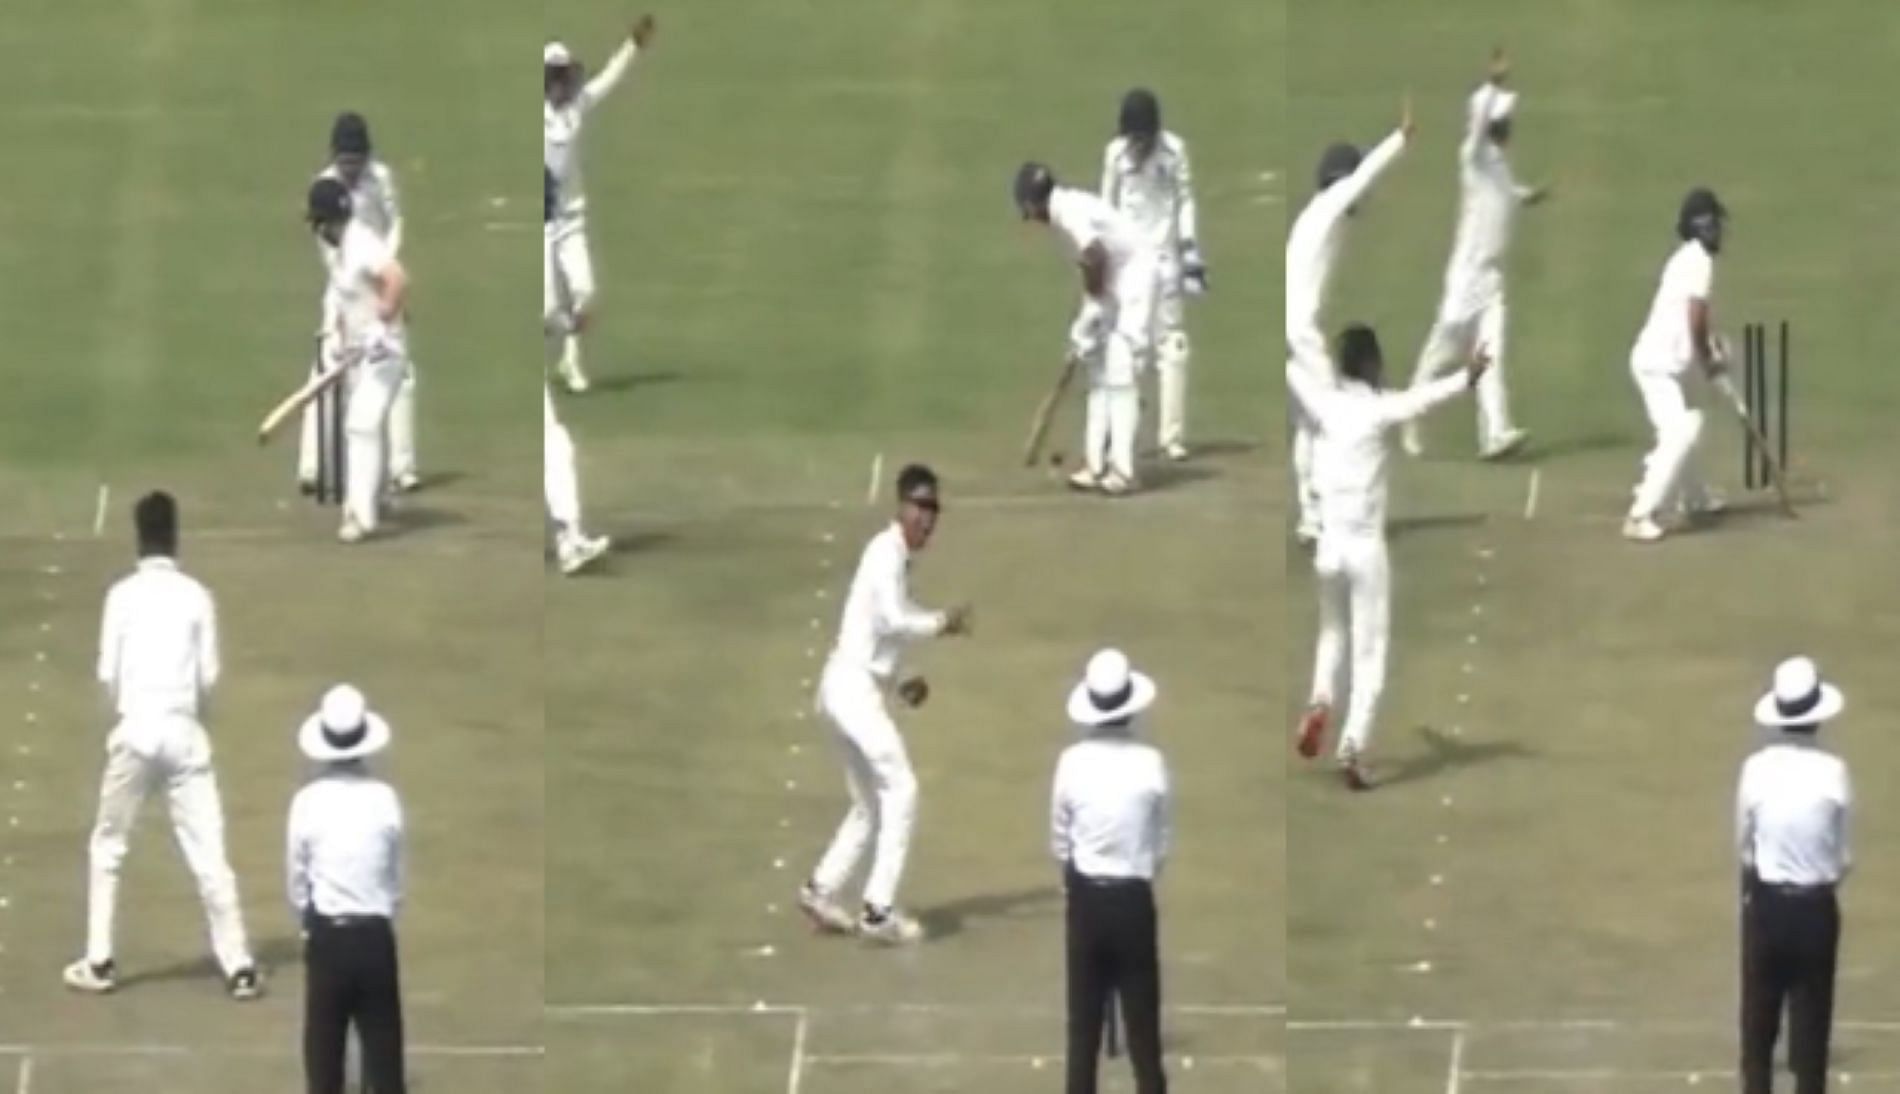 Kishan Singha made headlines with an incredible hat trick in the 2022 Ranji Trophy.